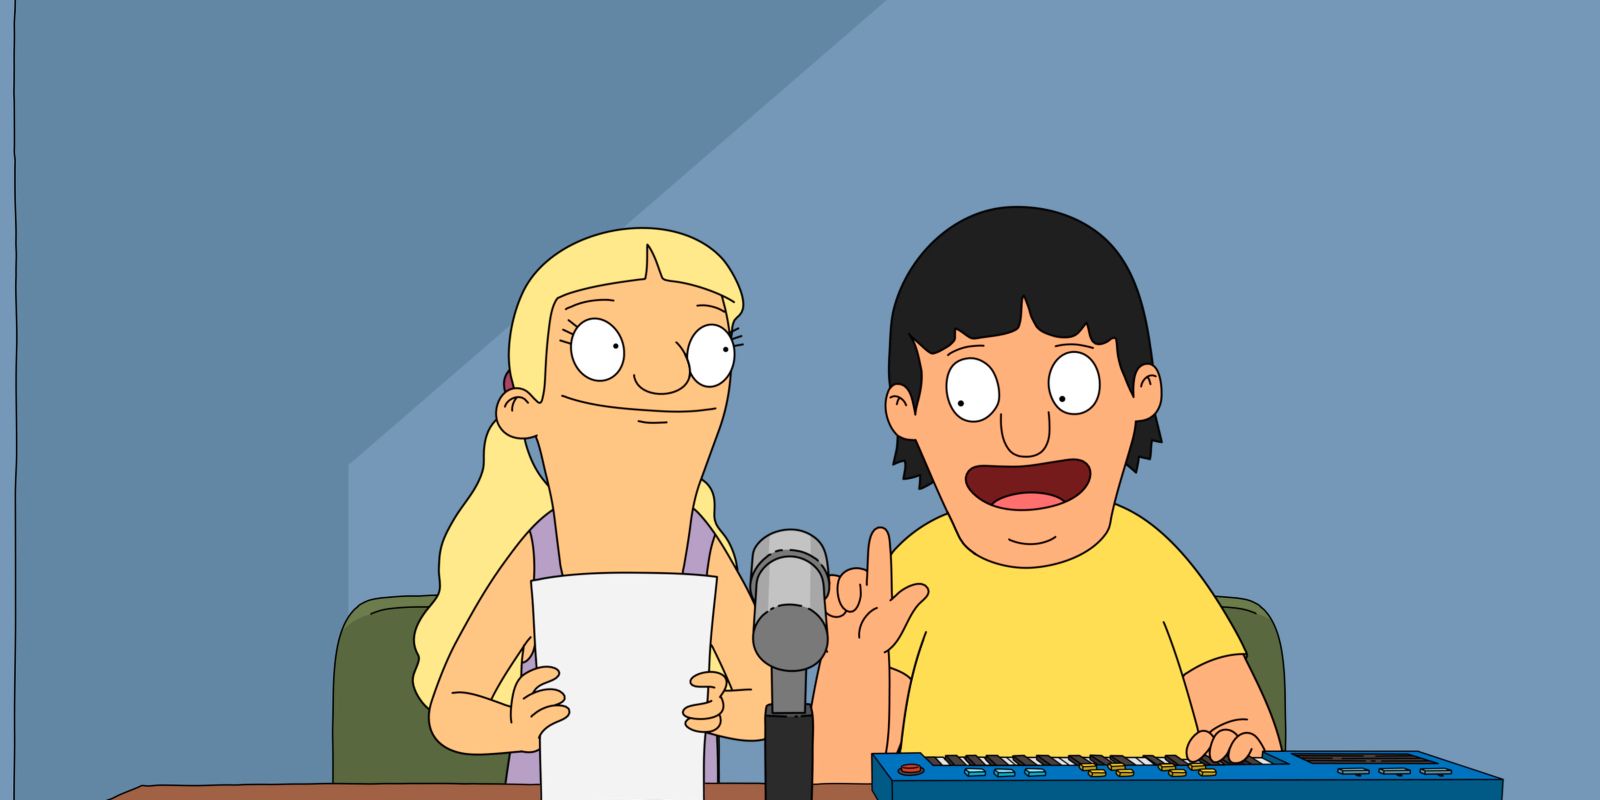 the gene and Courtney show bobs burgers best episodes